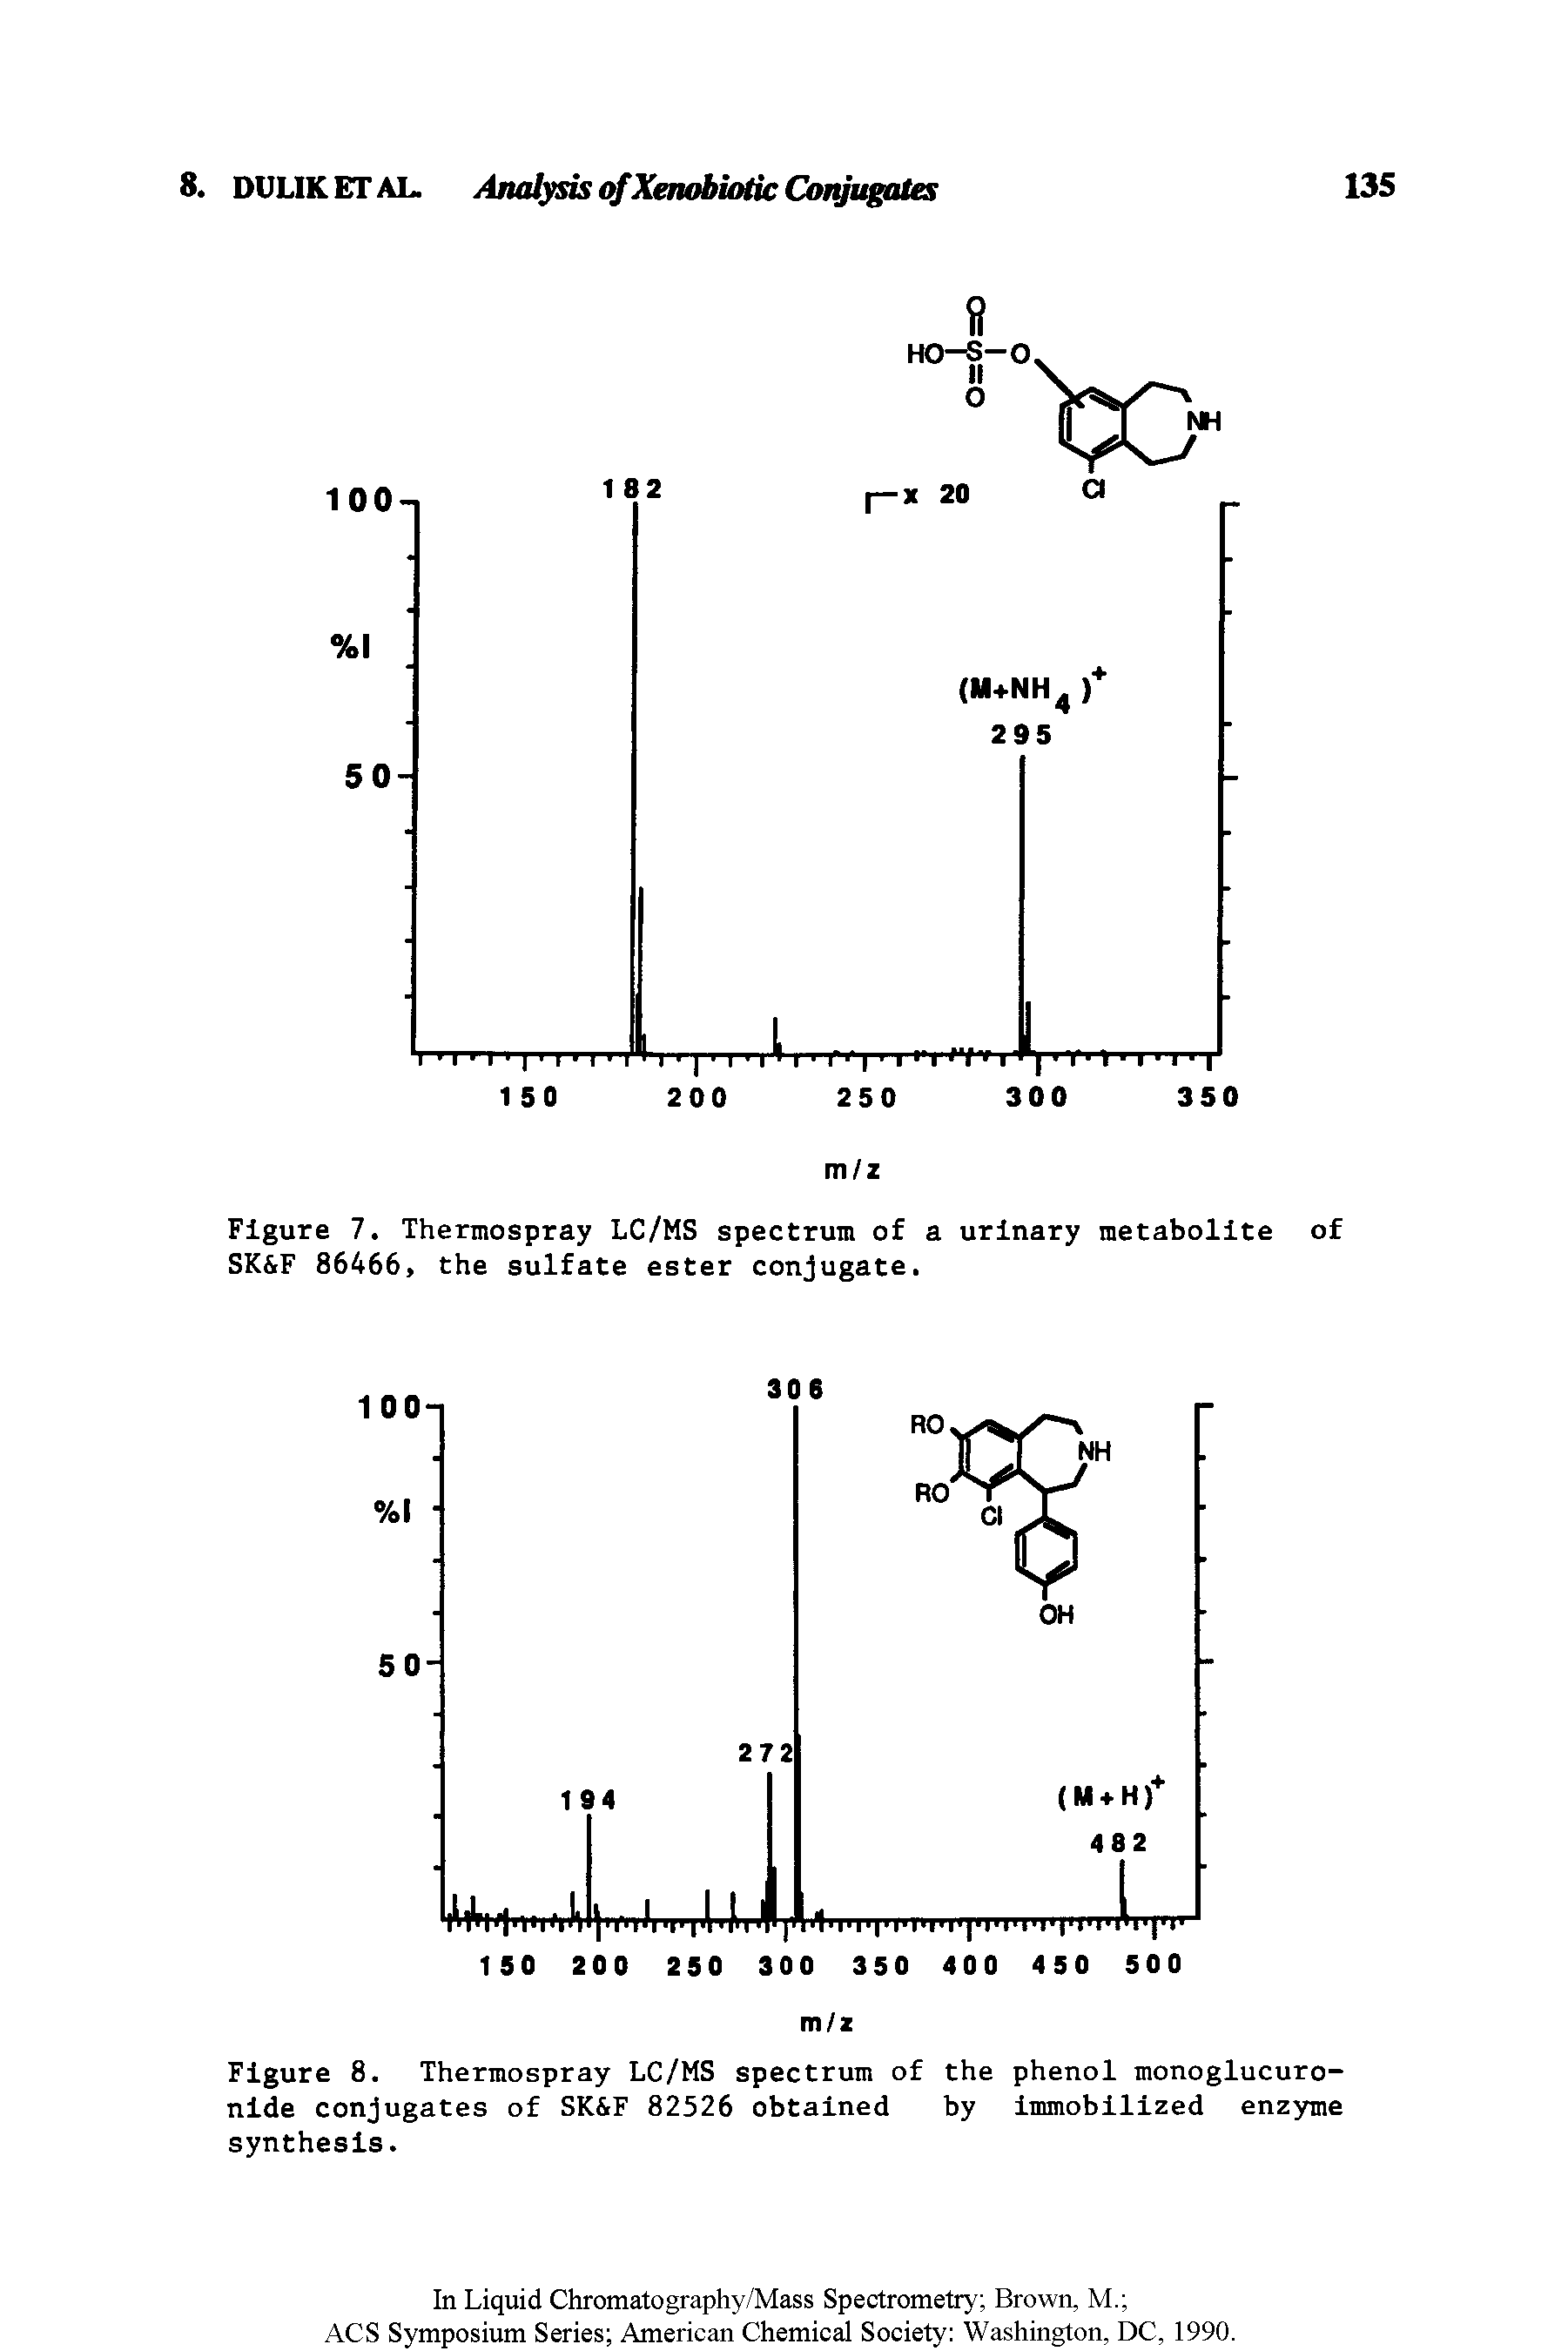 Figure 8. Thermospray LC/MS spectrum of the phenol monoglucuronide conjugates of SK F 82526 obtained by immobilized enzyme synthesis.